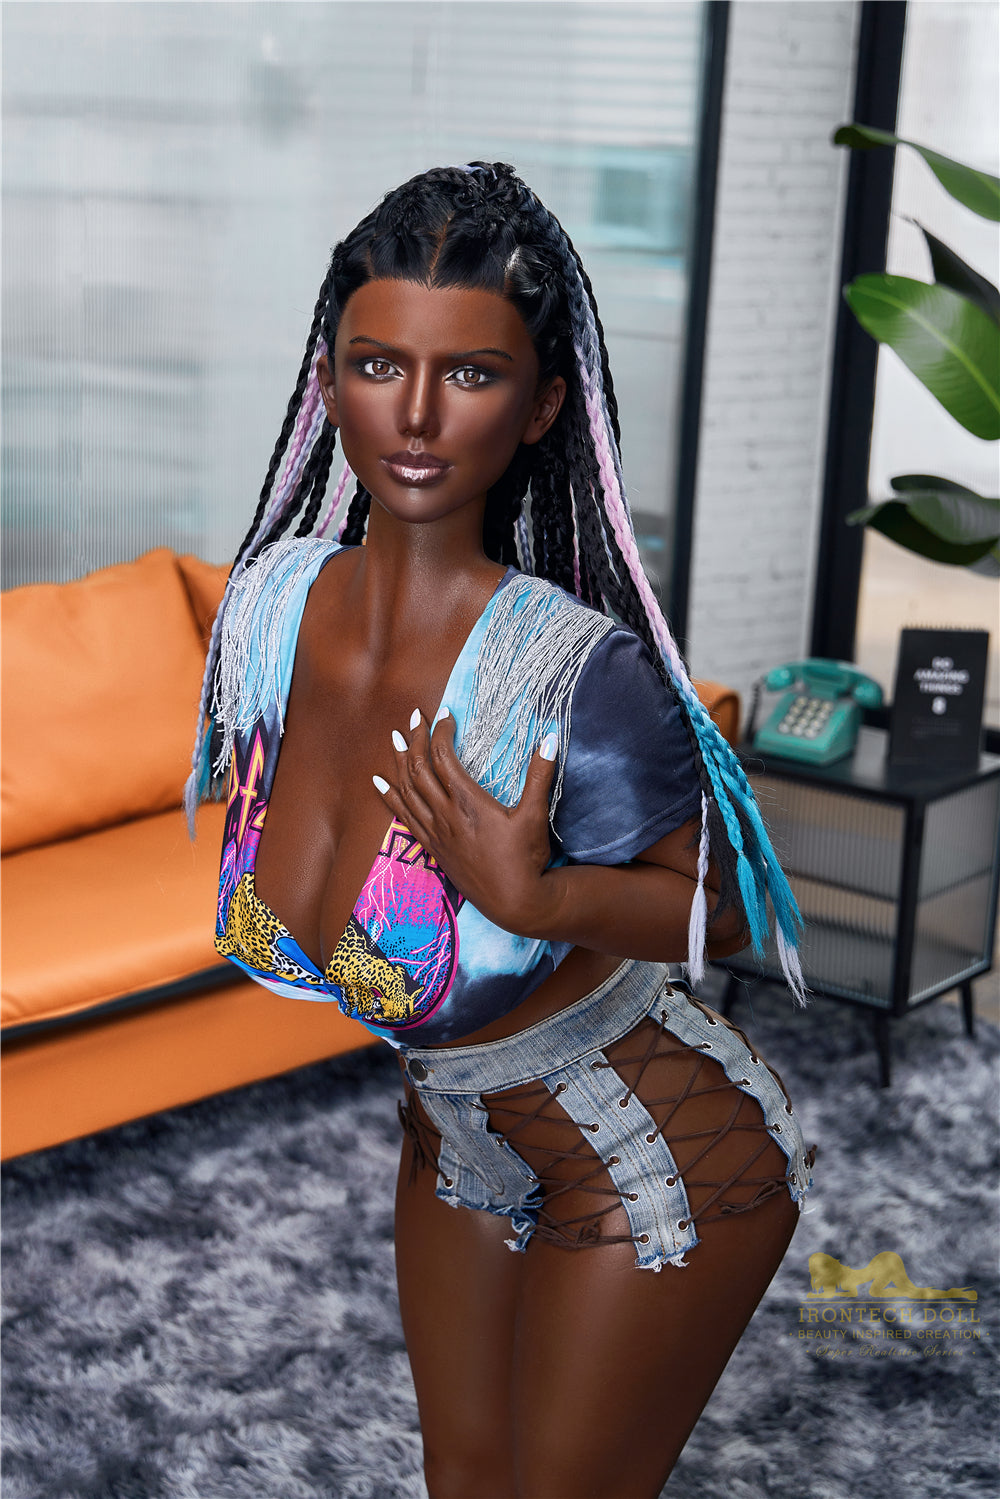 Irontech 160 cm H Silicone - Celine (Ebony) | Buy Sex Dolls at DOLLS ACTUALLY